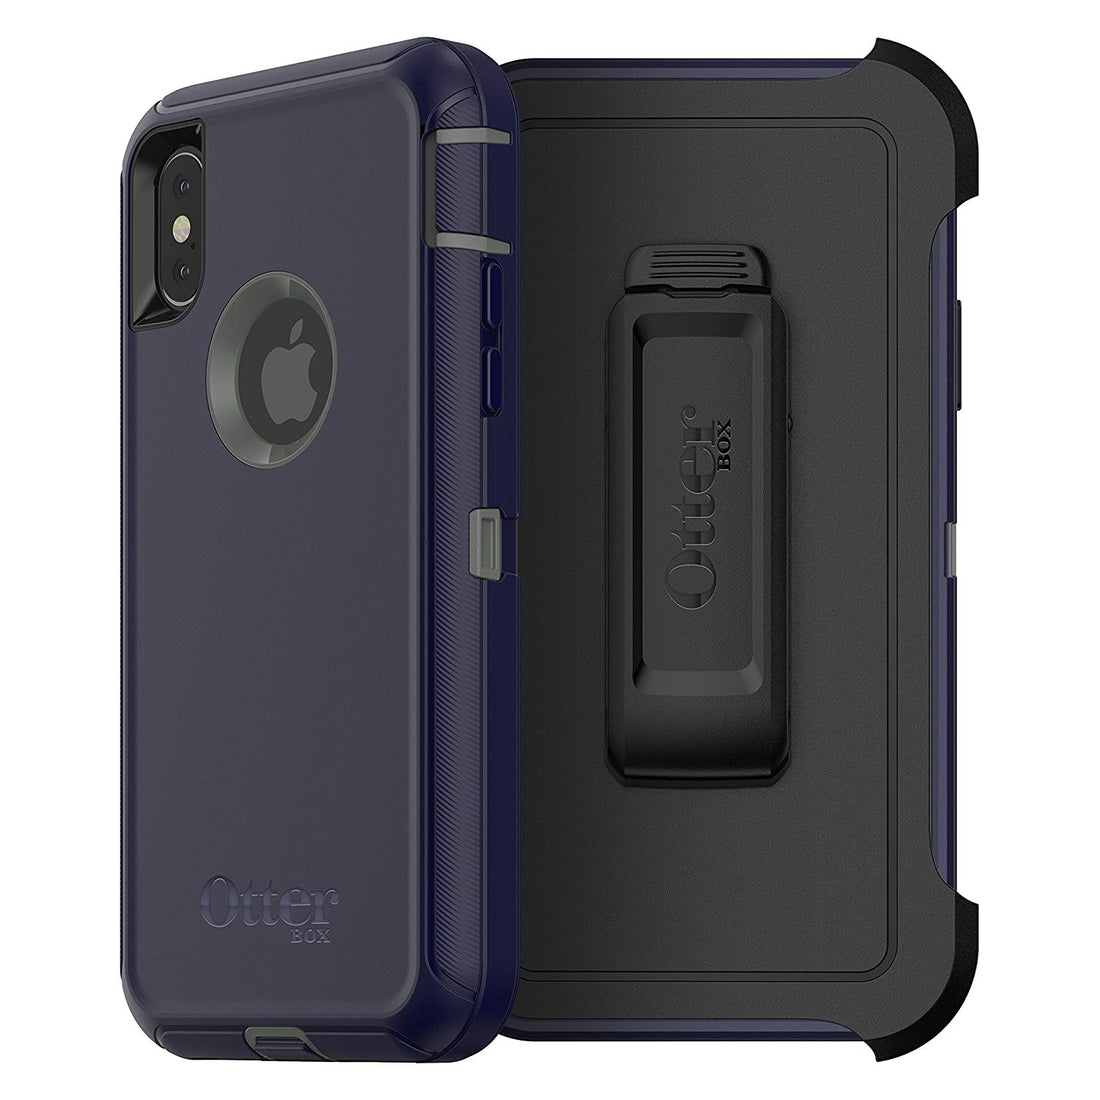 OtterBox DEFENDER SERIES Case &amp; Holster for iPhone X / iPhone XS - Stormy Peaks (Certified Refurbished)